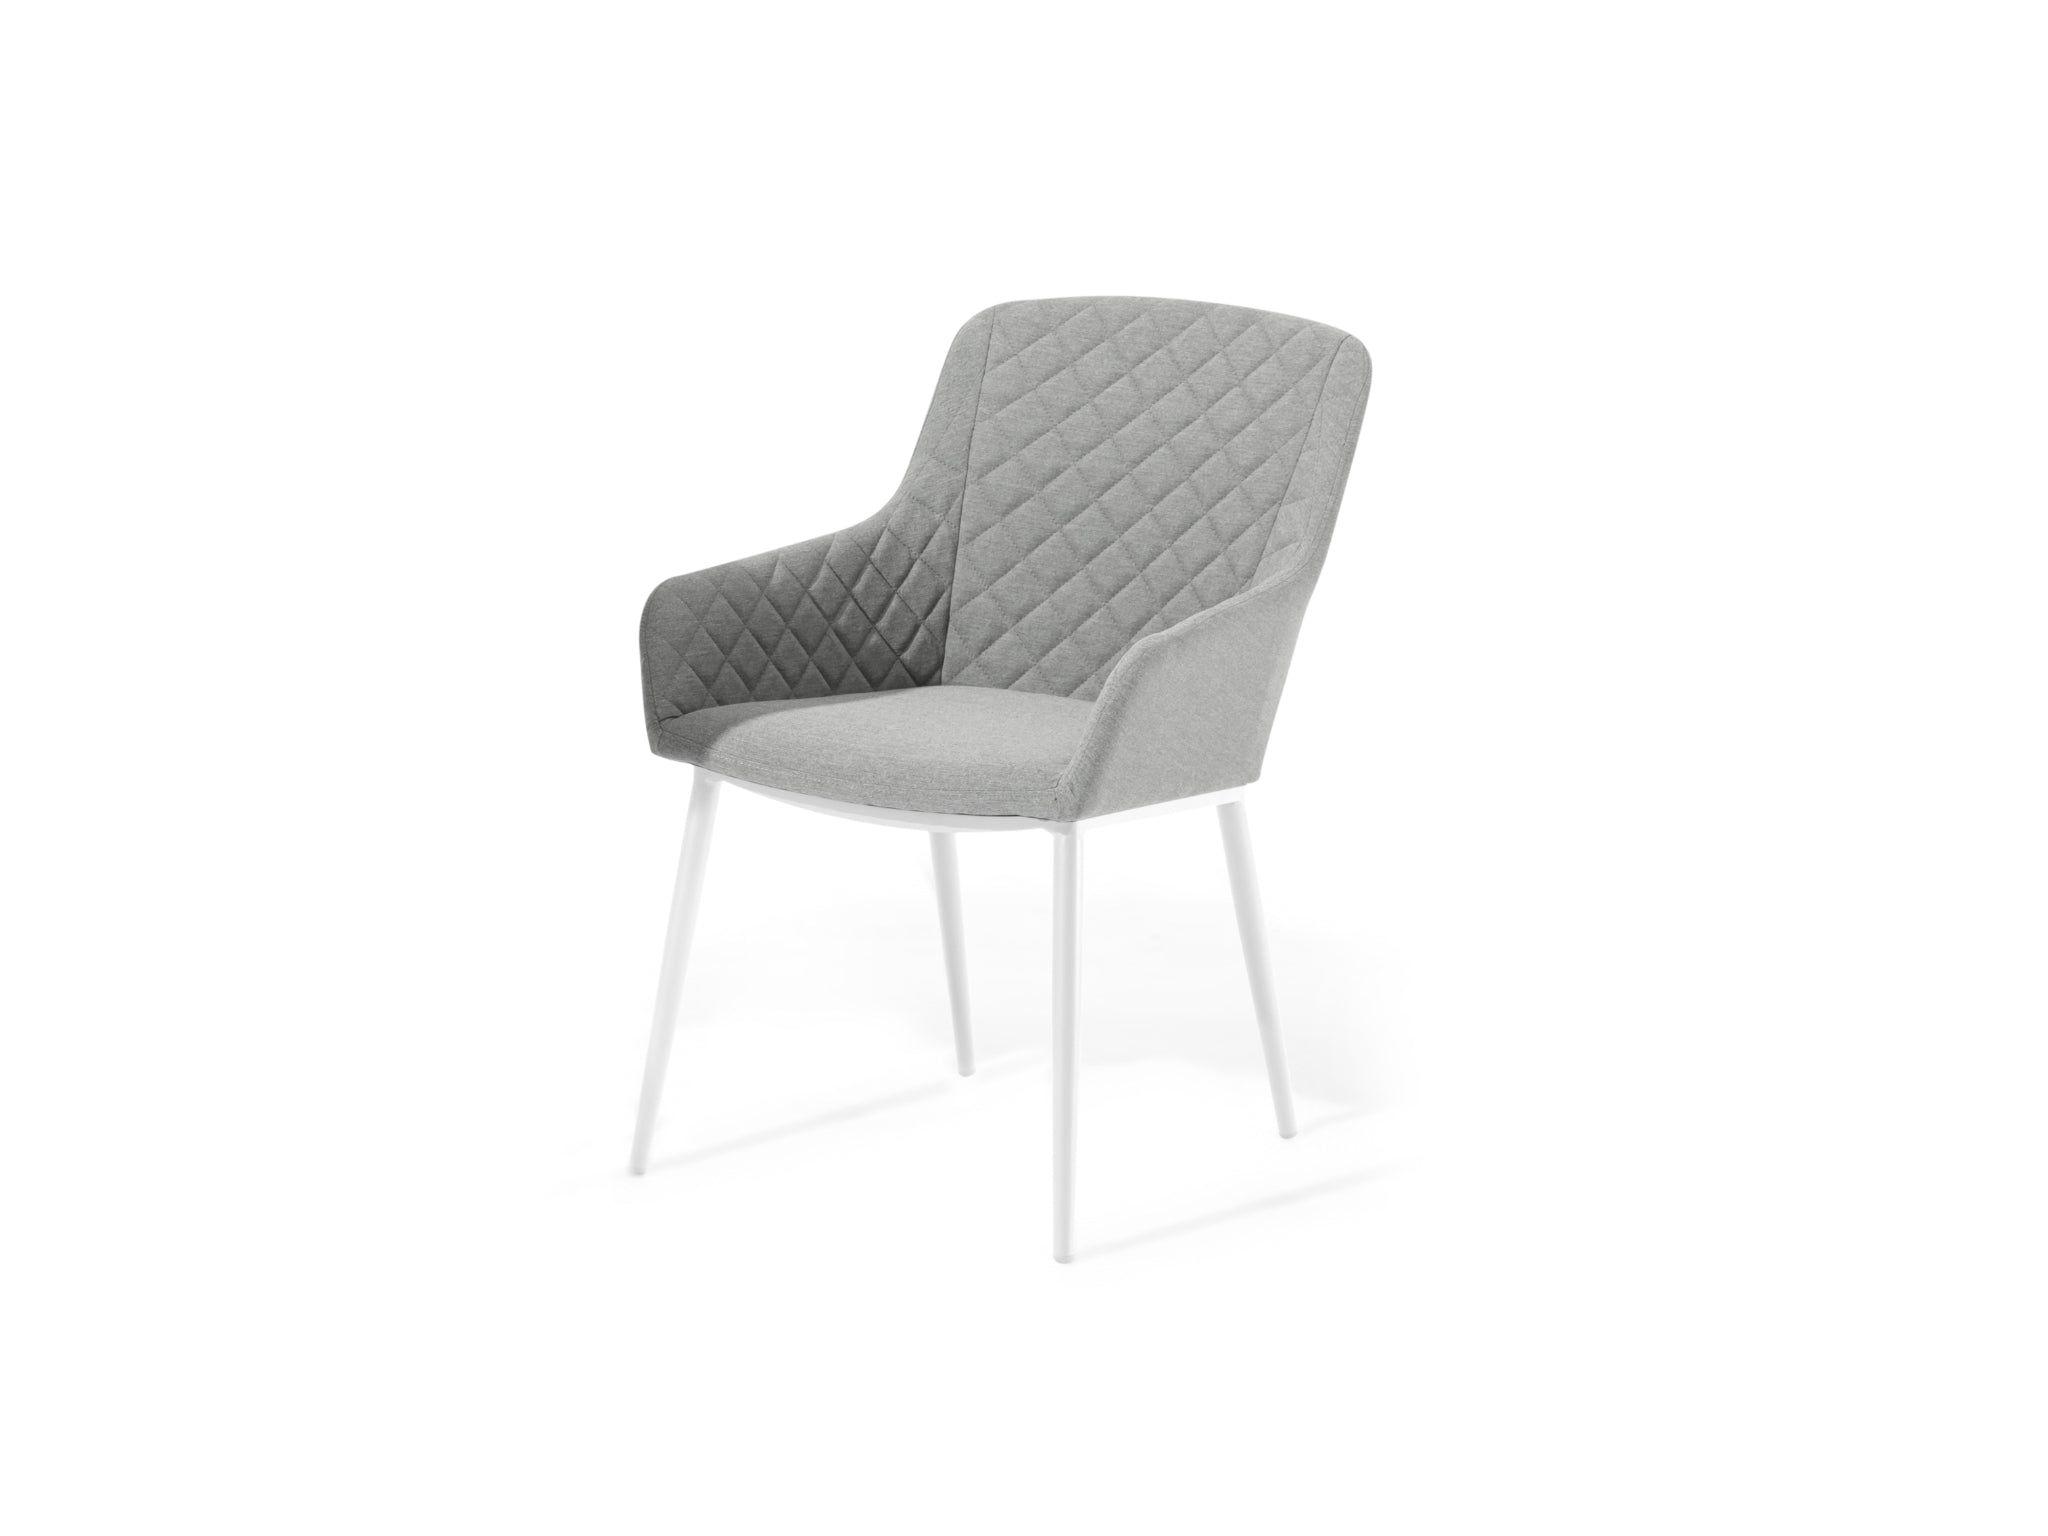 SIMPO by Sunlongarden Zest Dining Chair